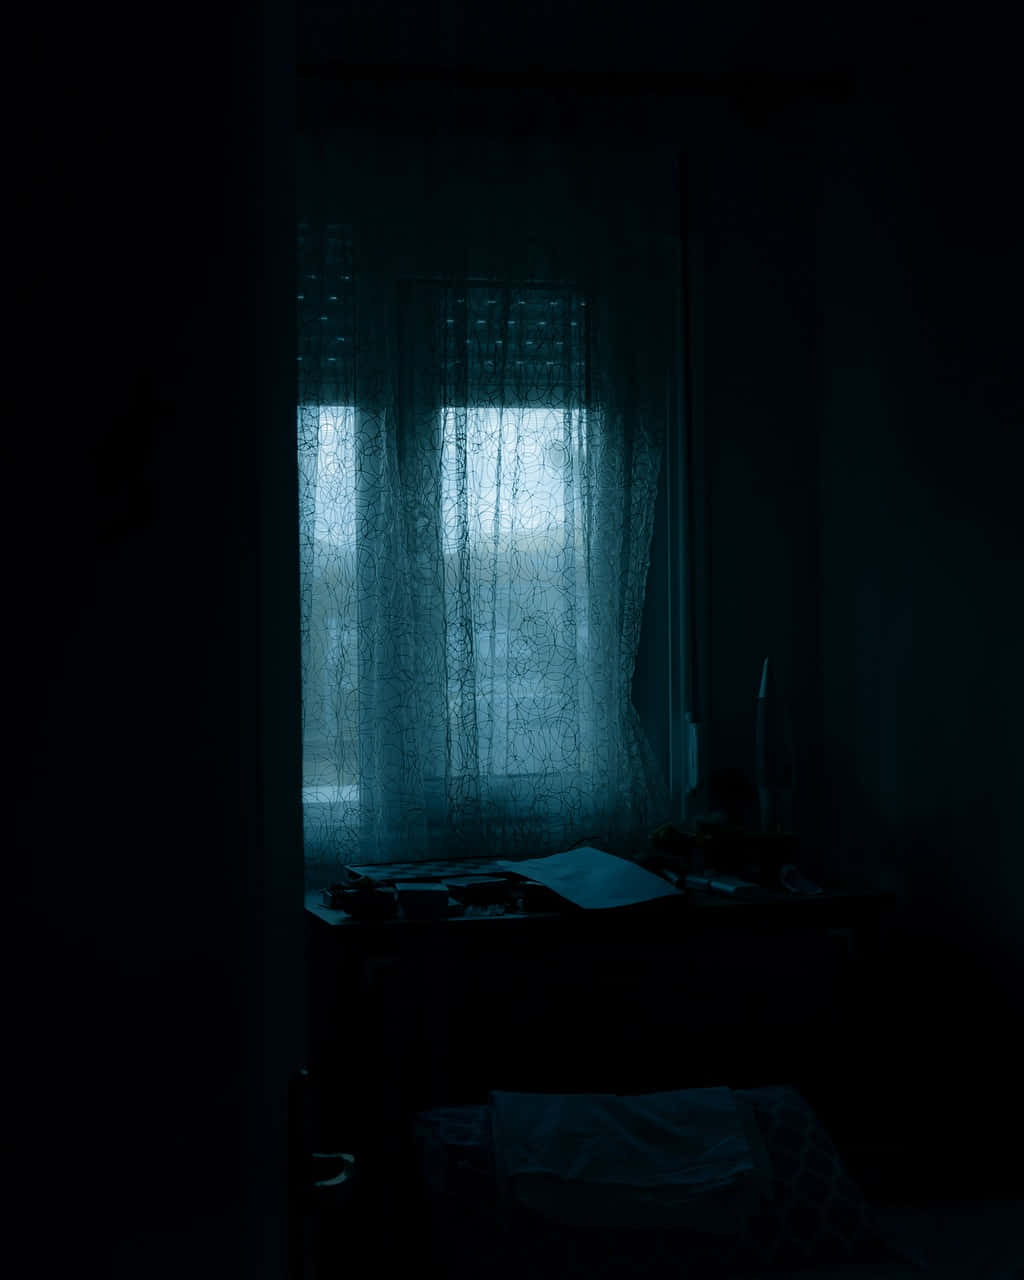 Dark Moody Roomwith Window Curtains Wallpaper